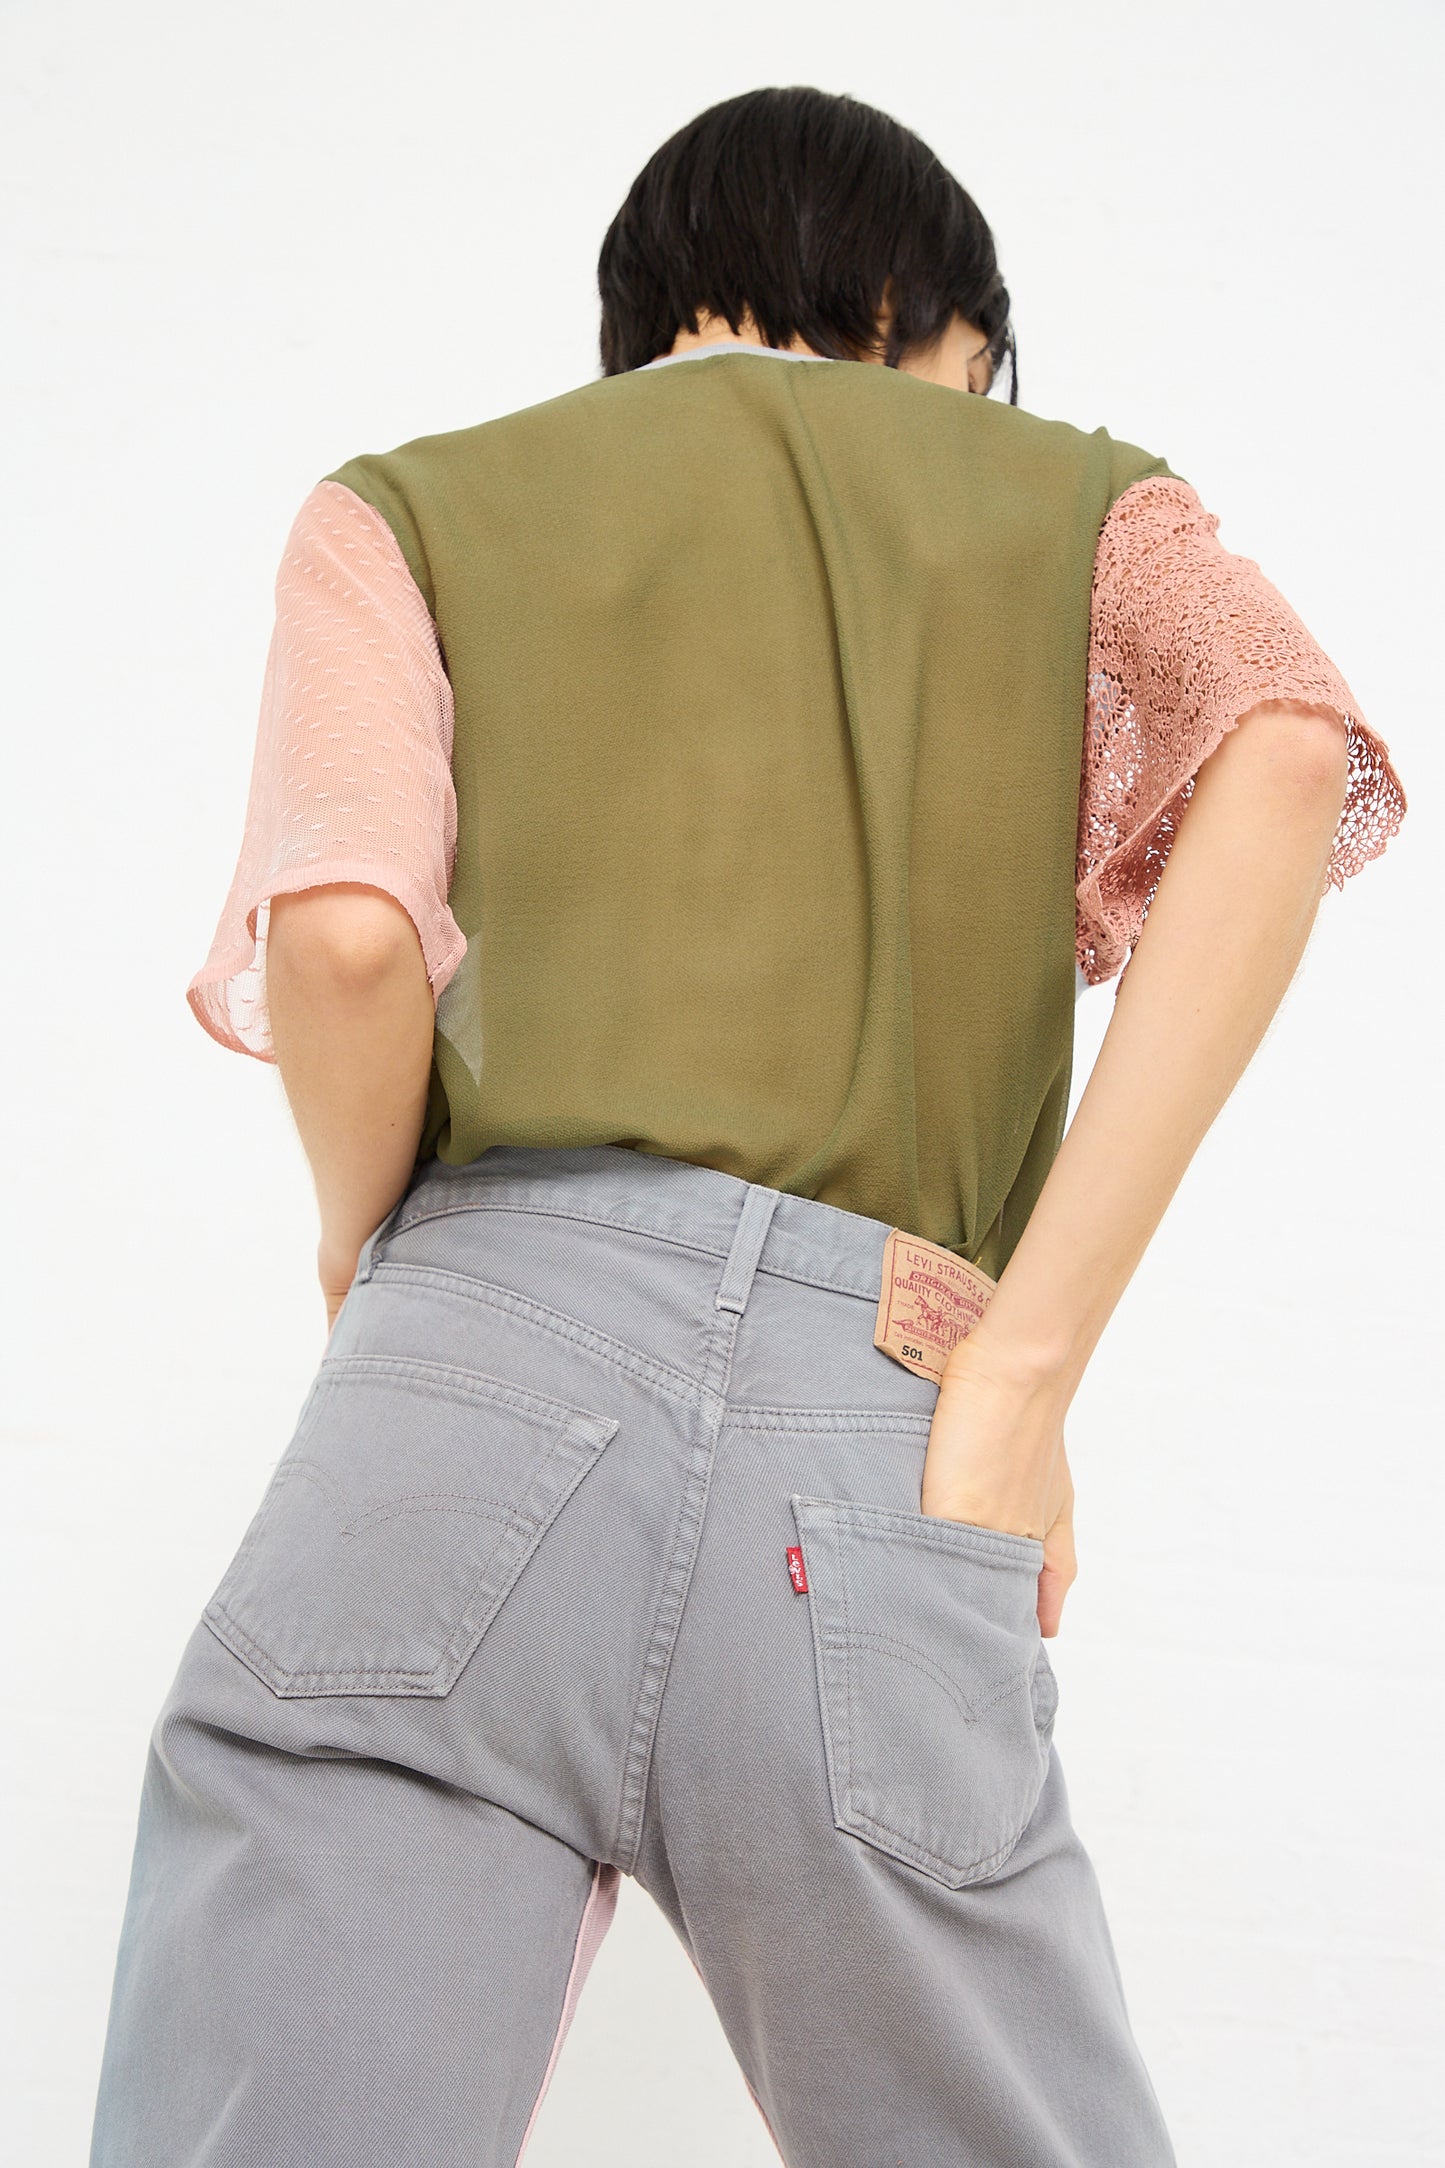 A person seen from behind wearing a green and pink top and No. 73 Jeanspleatfront in Pink/Grey mid-waist jeans by Bless, with a focus on the backside and waistband of the up-cycled vintage denim.